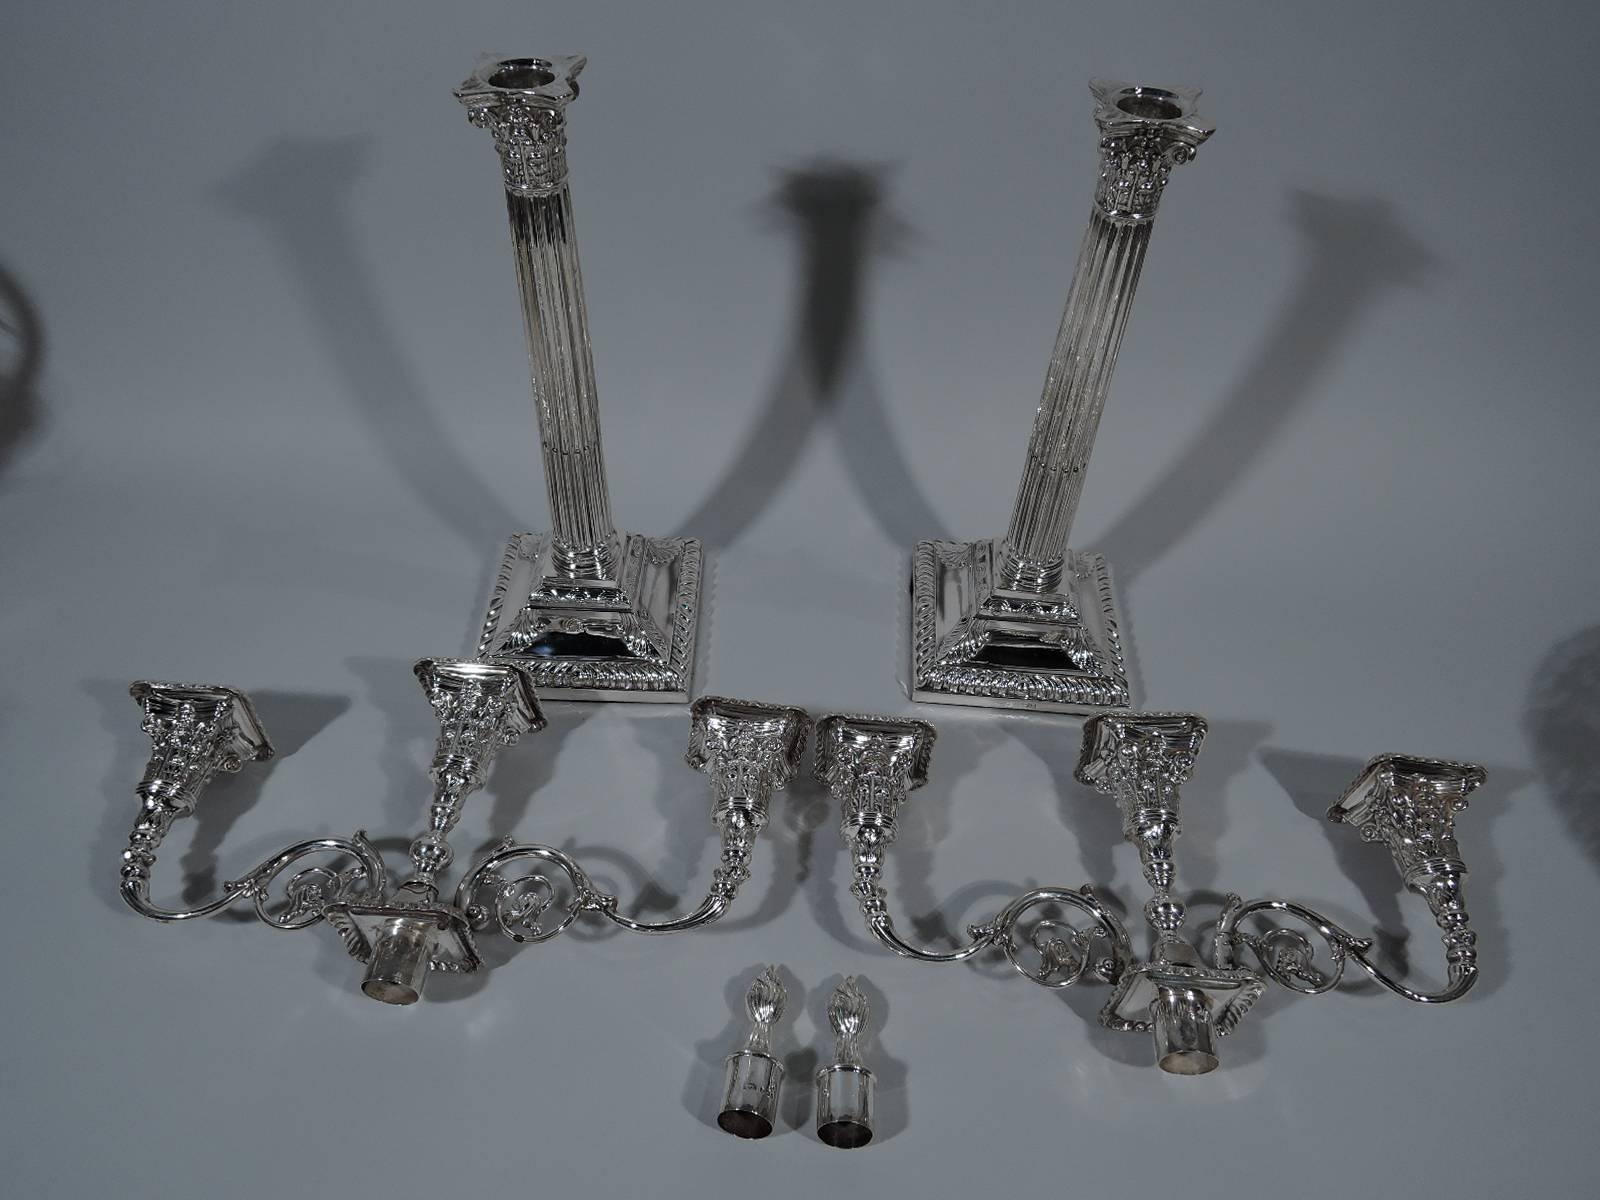 Pair of neoclassical sterling silver candelabra. Made by Henry Wilkinson & Co. in England, 1893-94. Each: Tall column with stop fluting on stepped square base. Central socket with flame finial between two capped rinceaux arms each terminating in